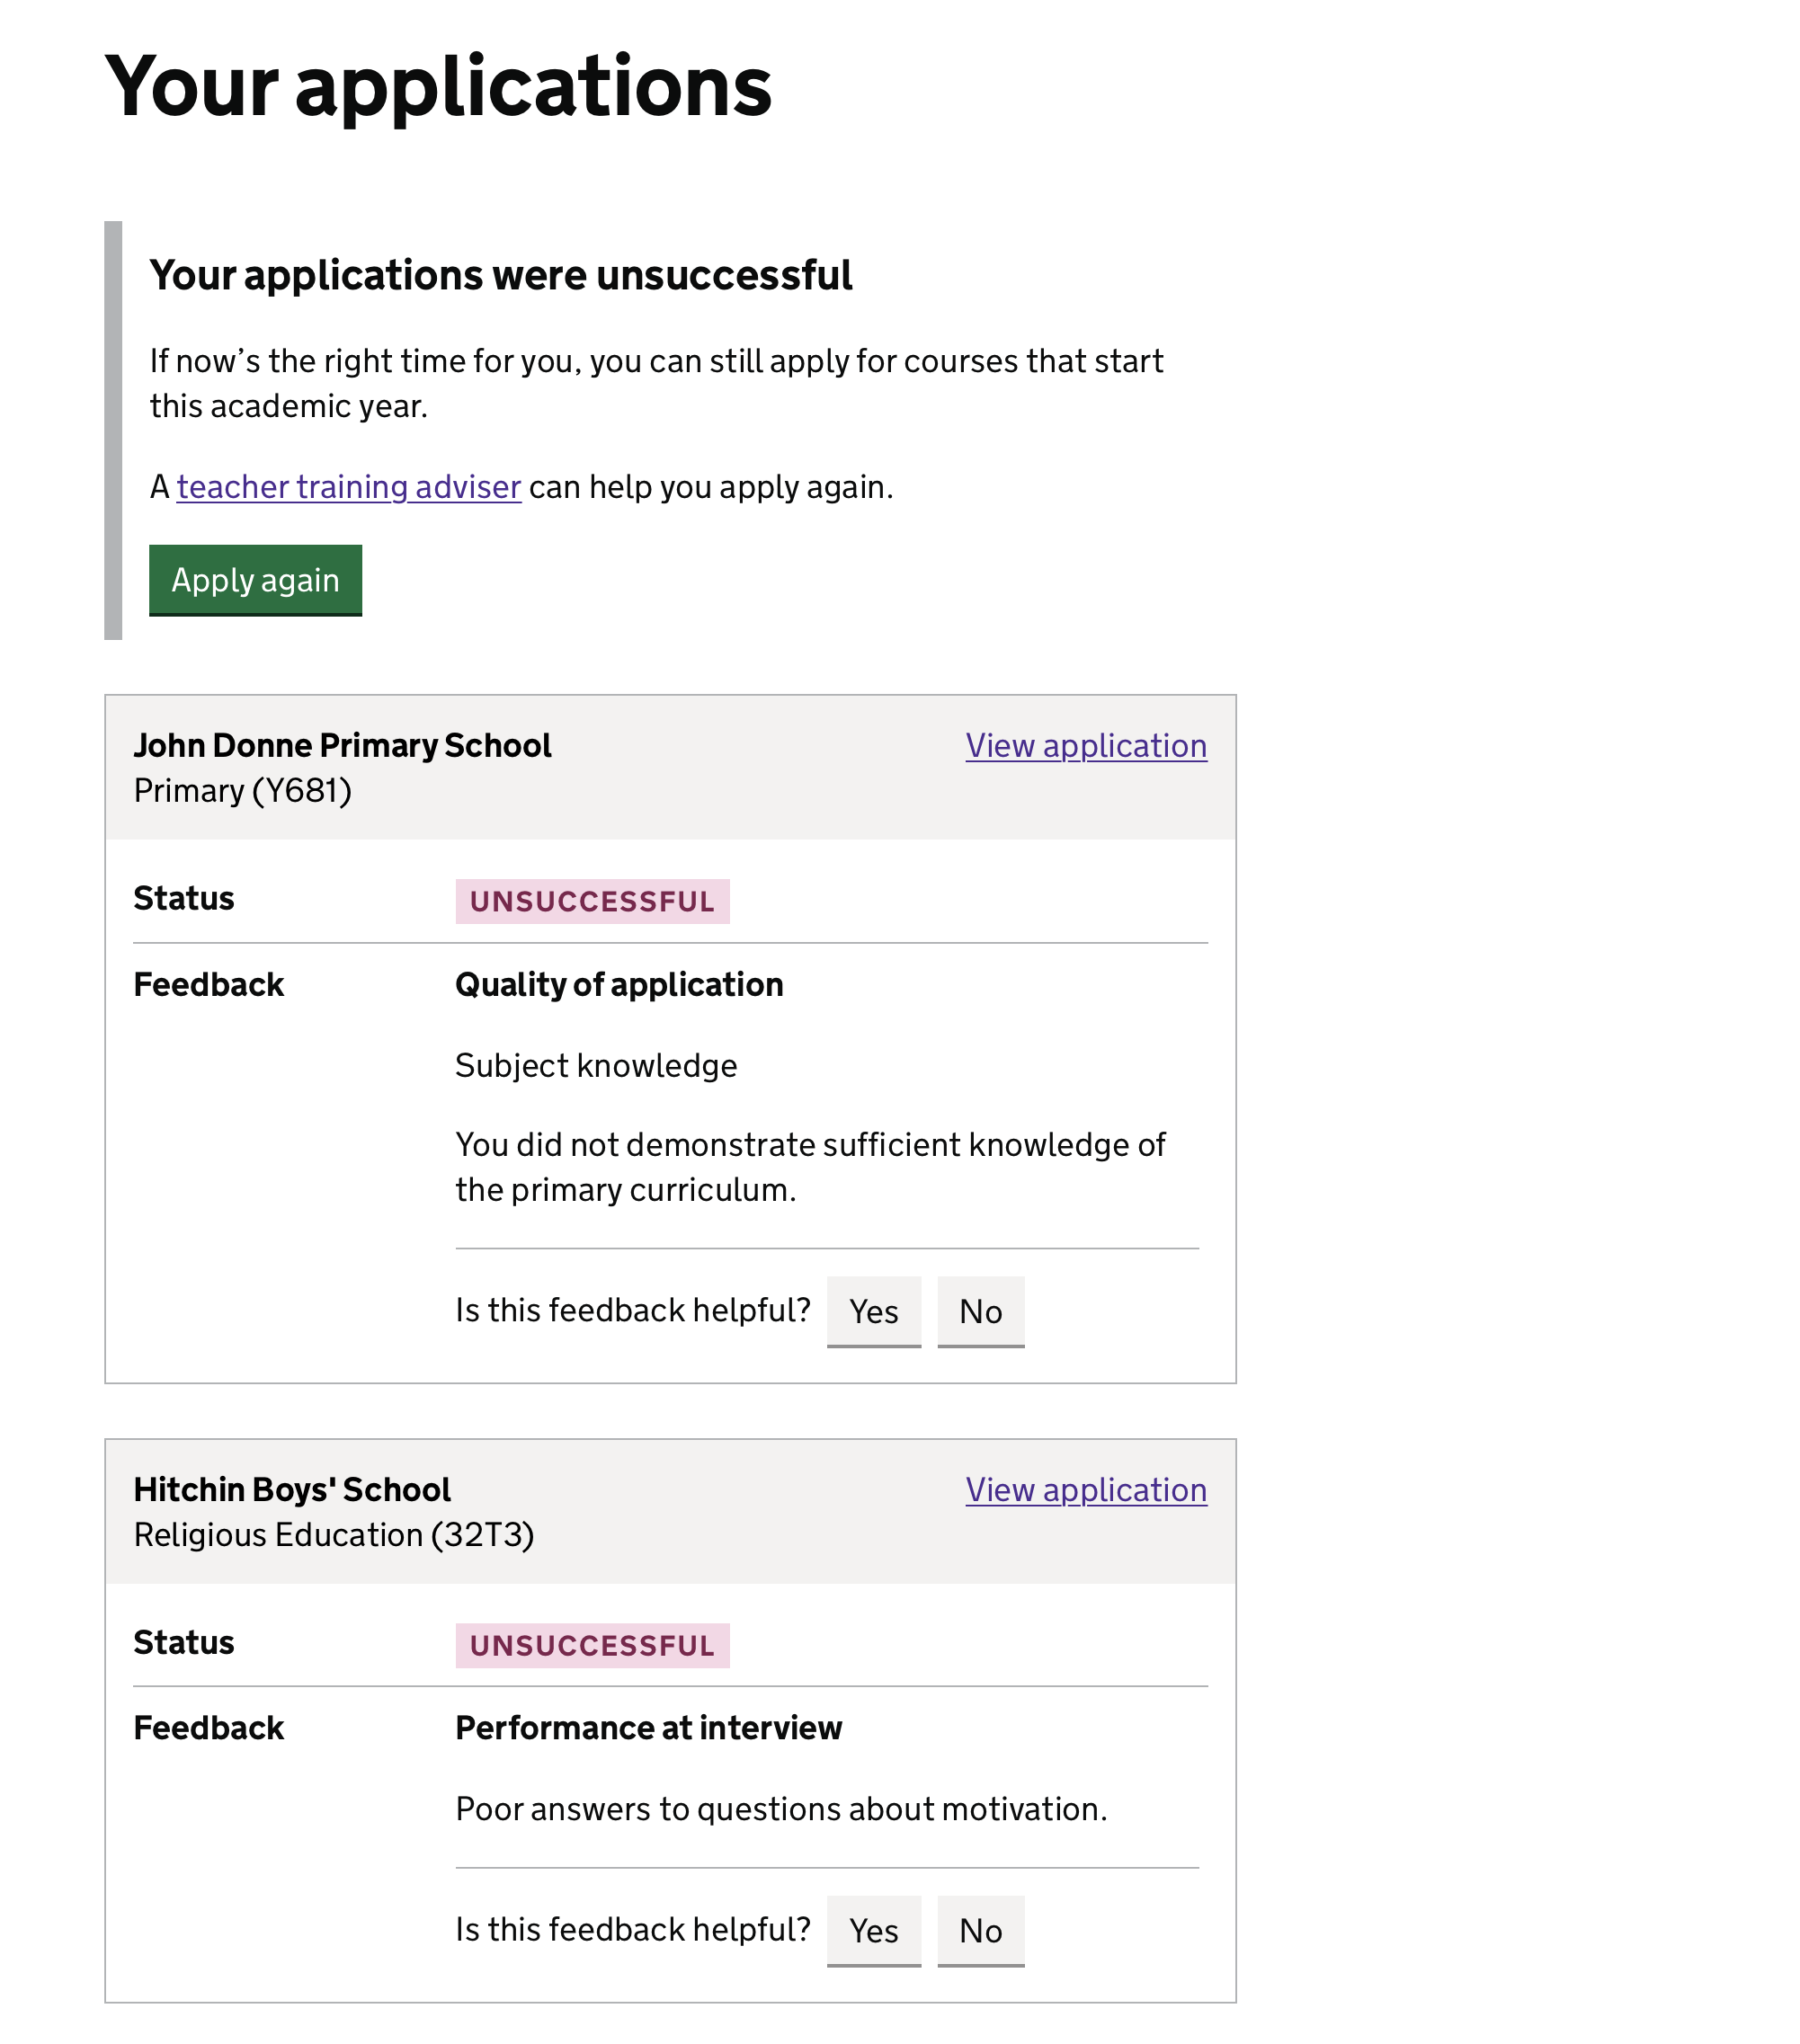 Screenshot with the heading 'Your applications' followed the text 'Your applications were unsuccessful. If now’s the right time for you, you can still apply for courses that start this academic year.' and a green button labelled 'Apply again'. Beneath this, two boxes are shown, each one has the title of a provider and a course and the status 'Unsuccessful'. The first one contains the feedback 'Subject knowledge: You did not demonstrate sufficient knowledge of the primary curriculum'. Beneath this is a line and then a question 'Is this feedback helpful?' followed by 2 grey buttons labelled 'Yes' and 'No'. The second box is similar, but with the feedback 'Peformance at interview: Poor answers to questions about motivation'.